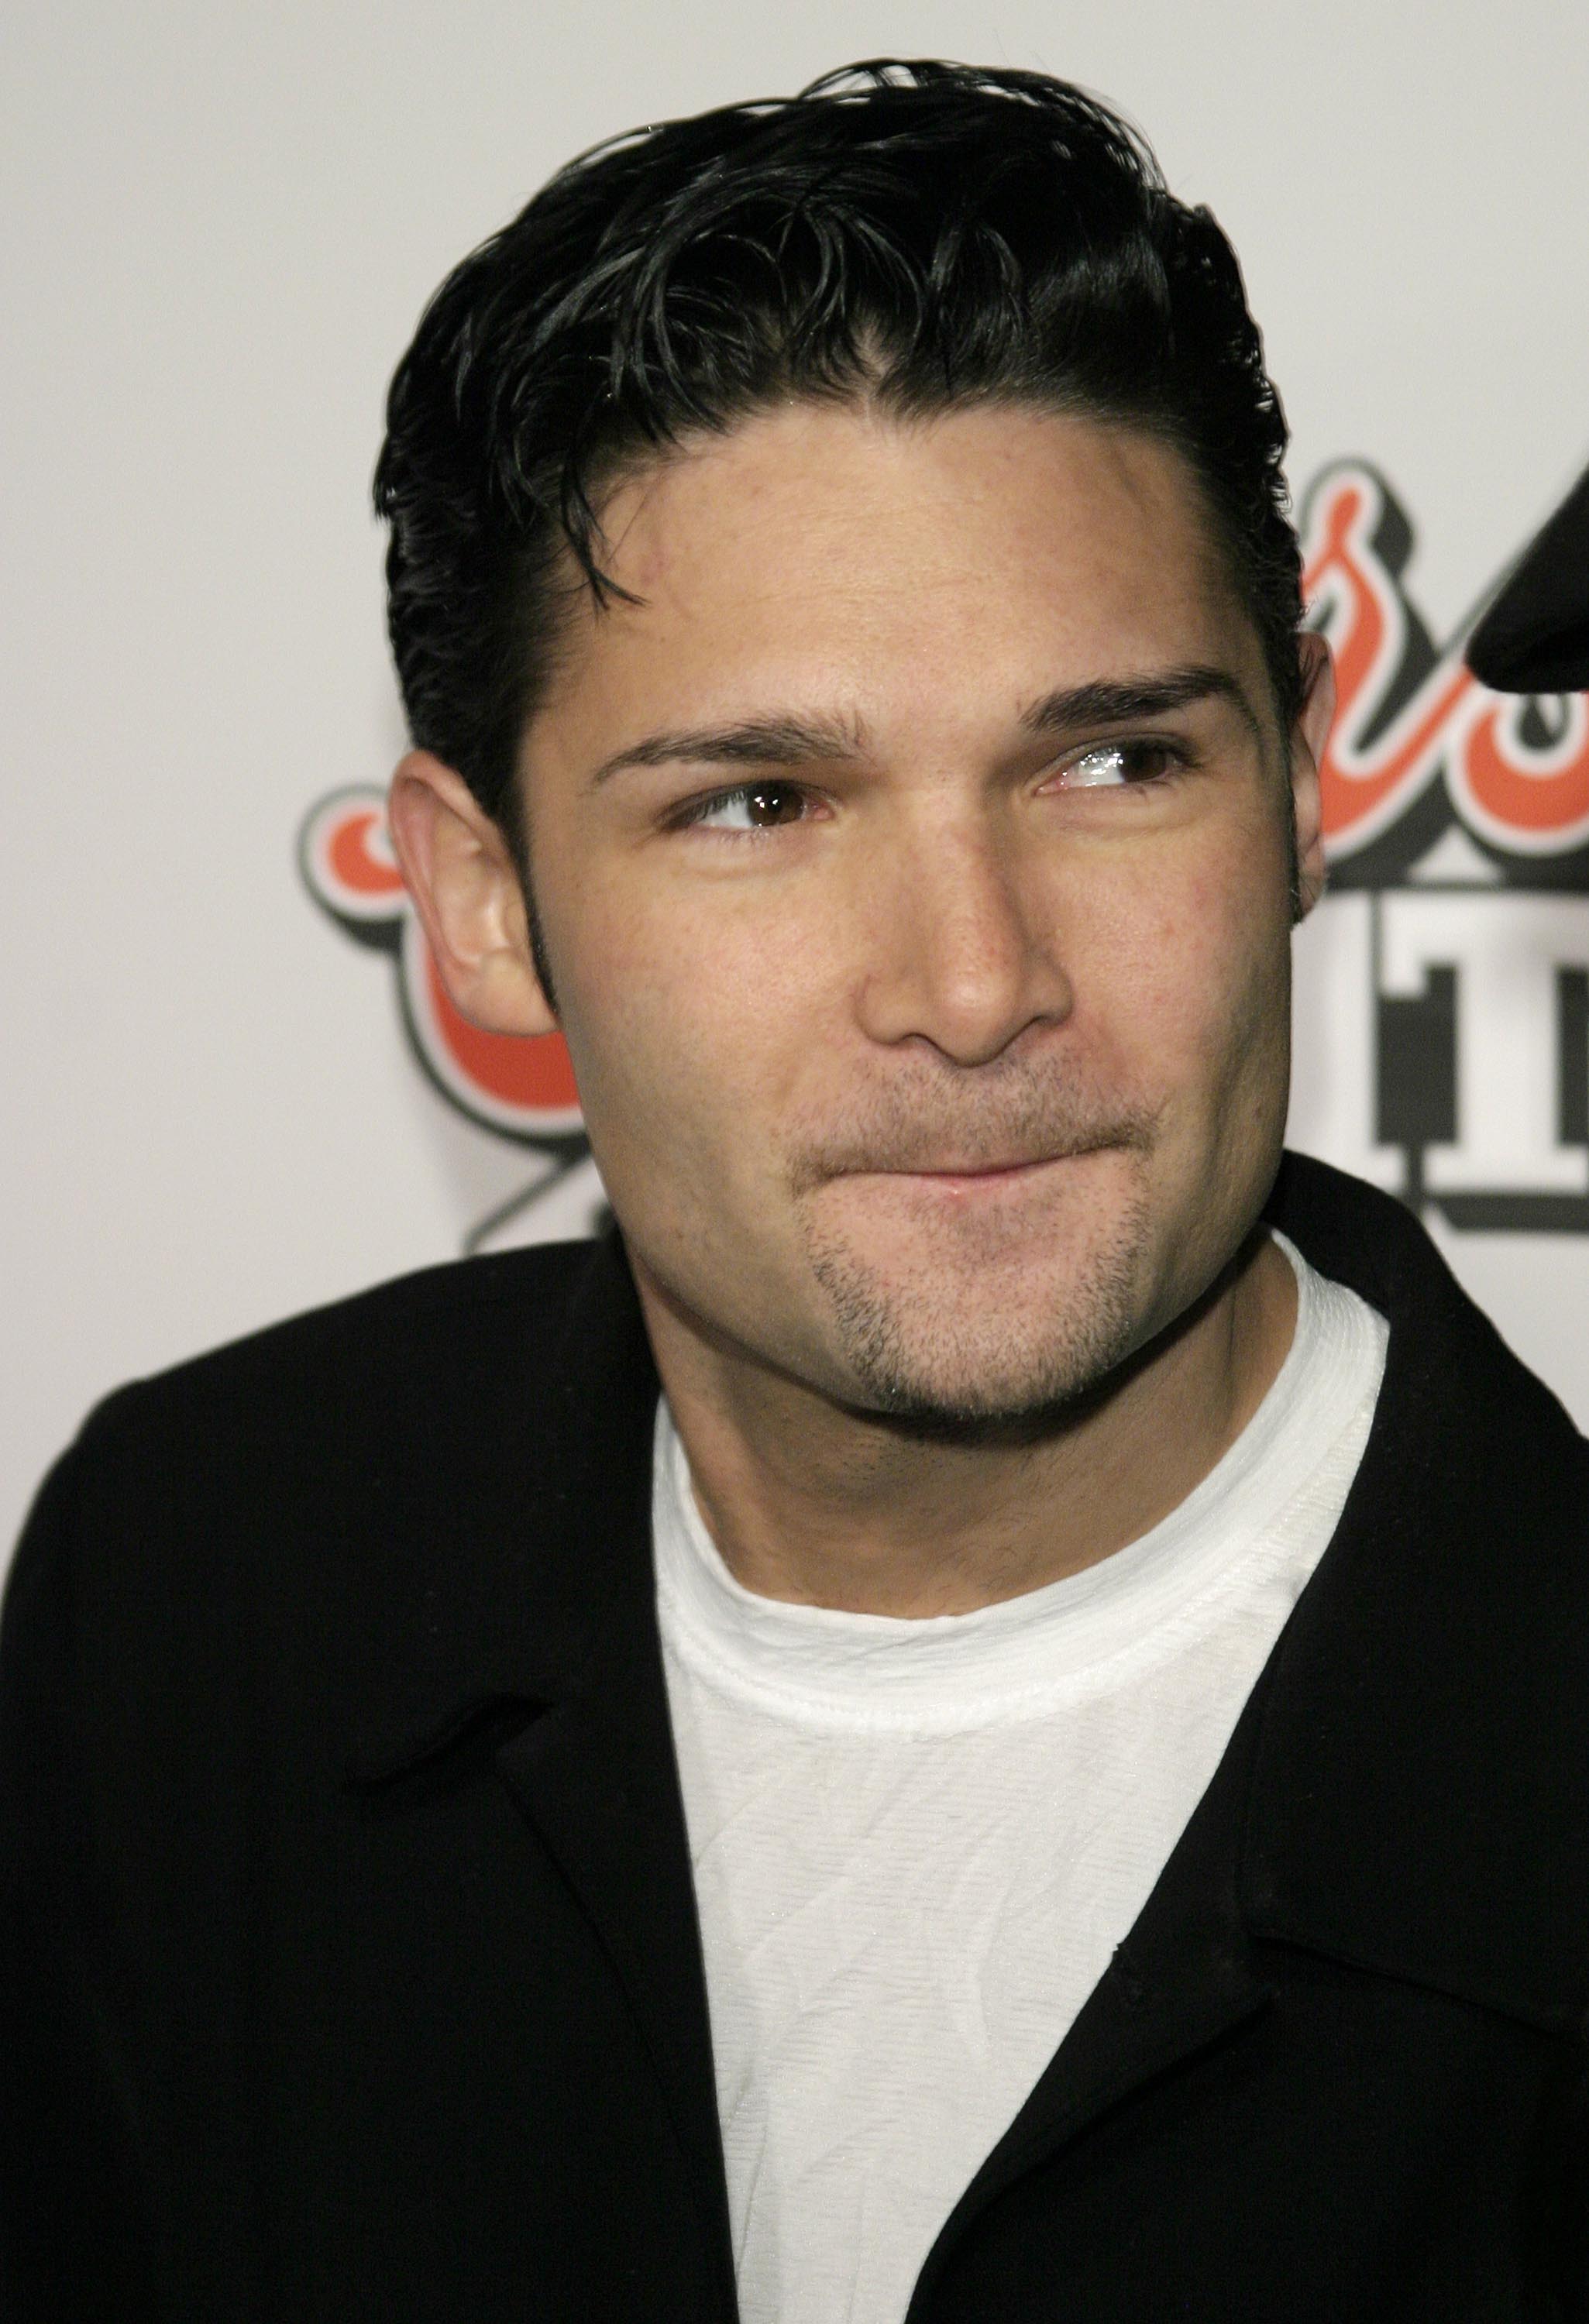 Corey Feldman at the Los Angeles premiere of "My Baby's Daddy," 2004 | Source: Getty Images